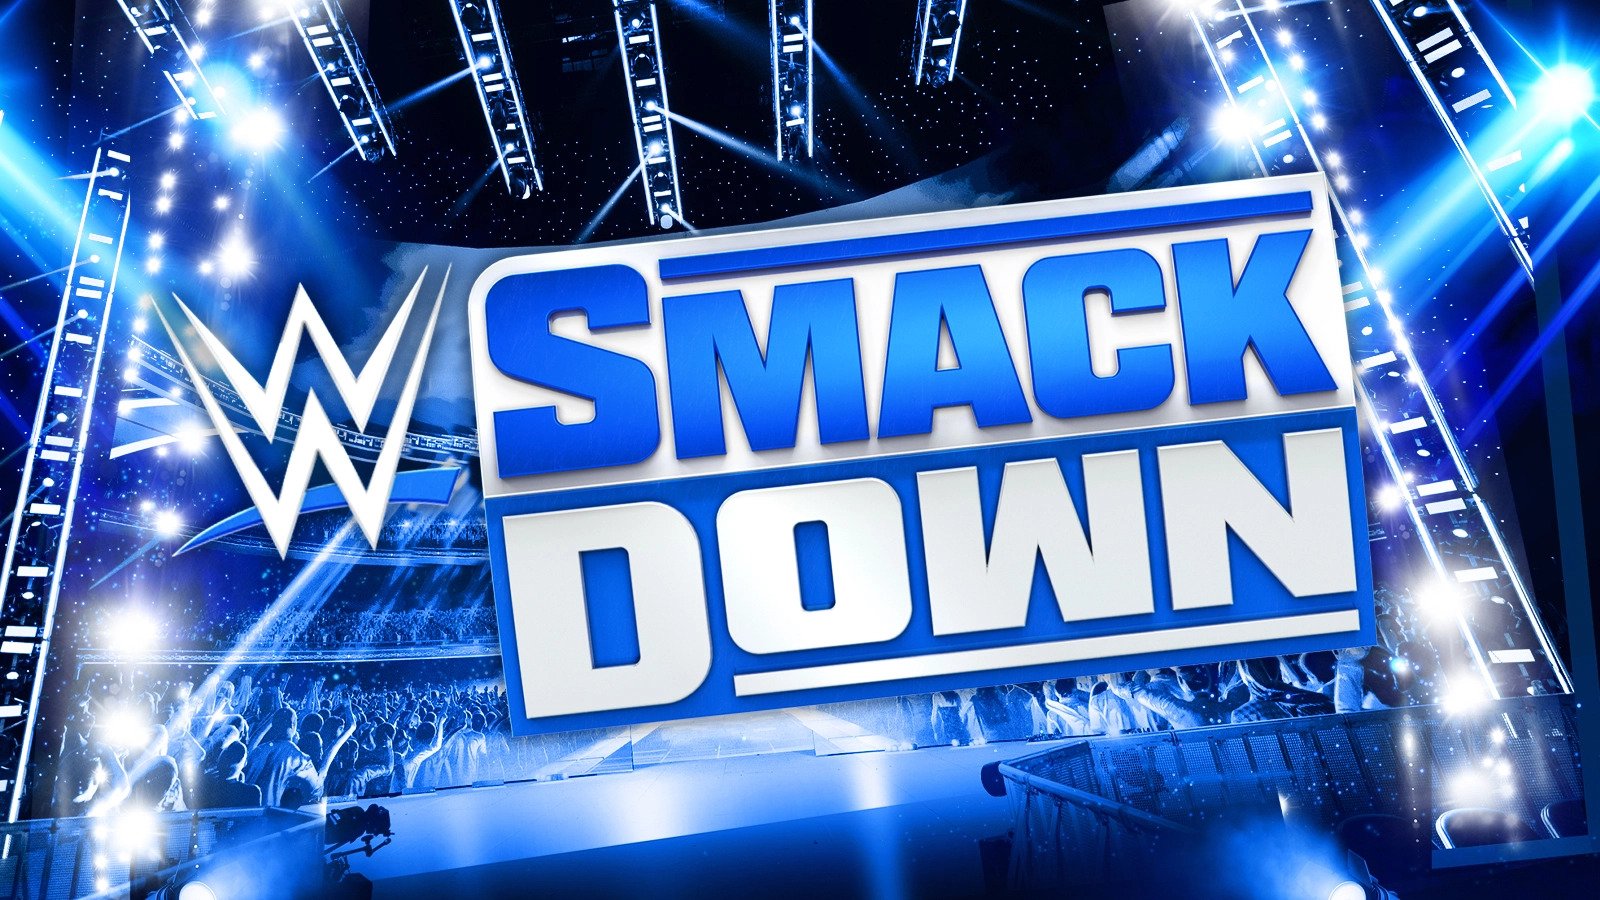 Blue and white Smack Down logo on a blue background